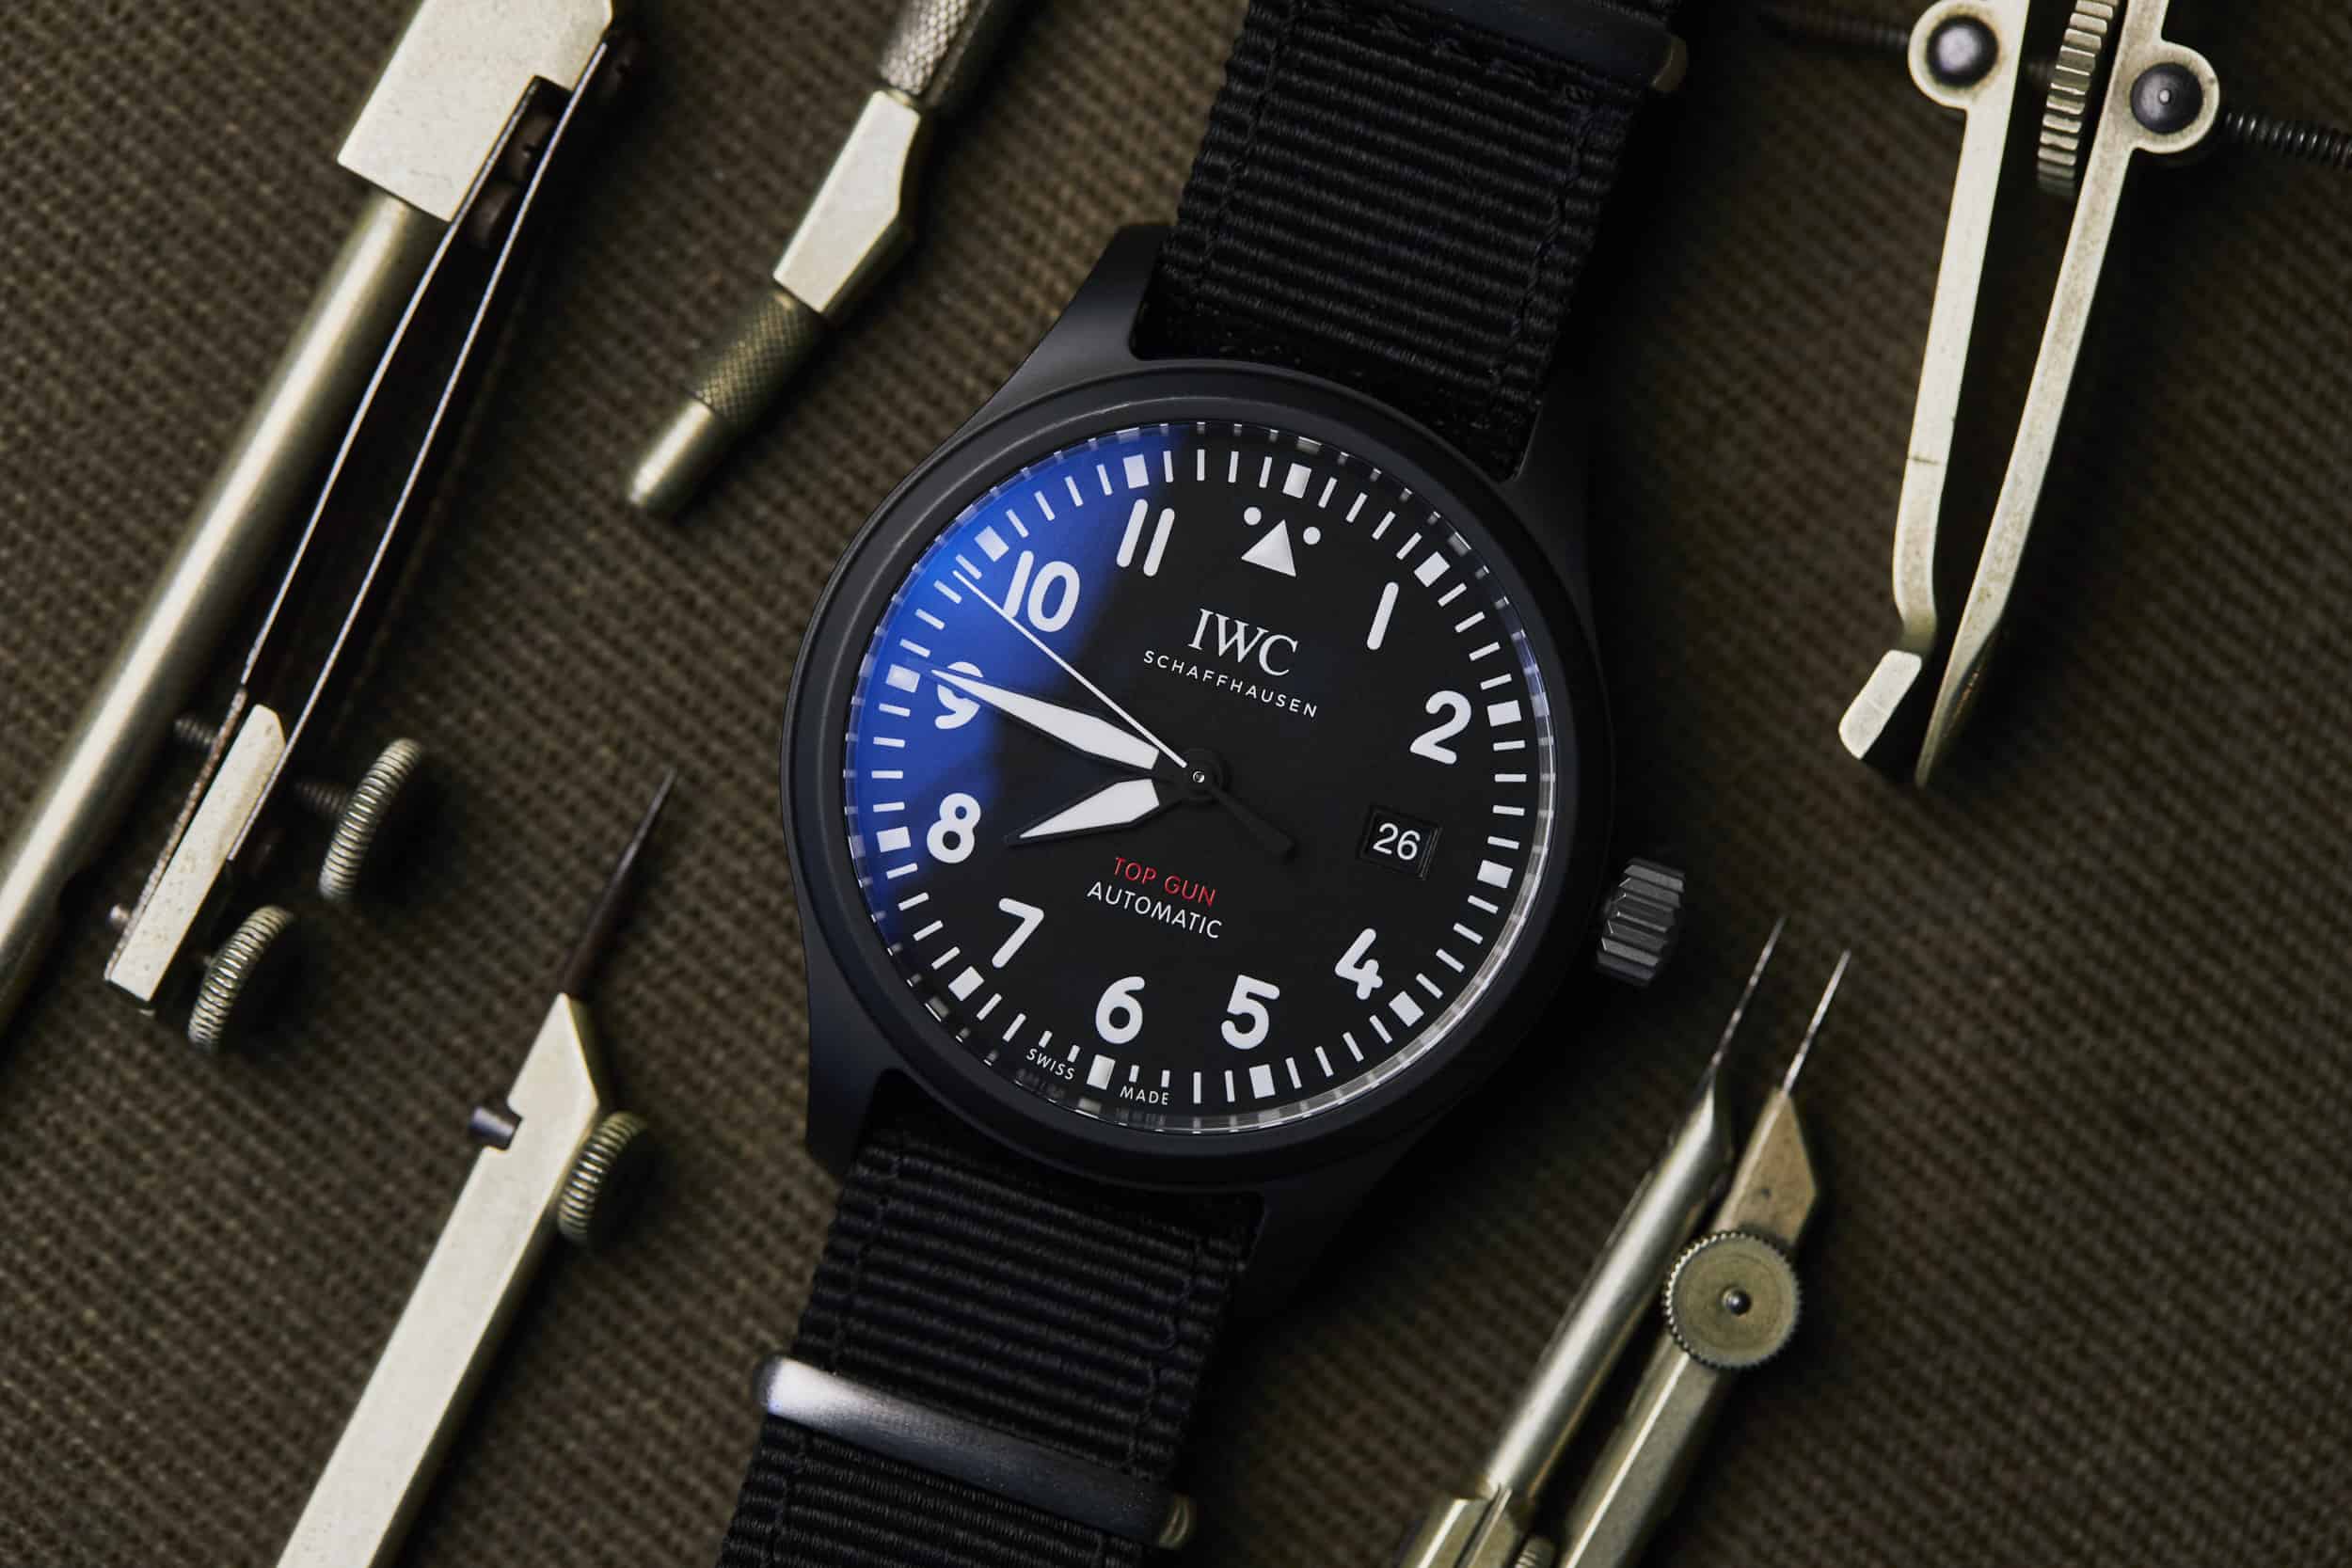 Jeg regner med Devise Antarktis Review: The IWC Automatic Top Gun - Worn & Wound